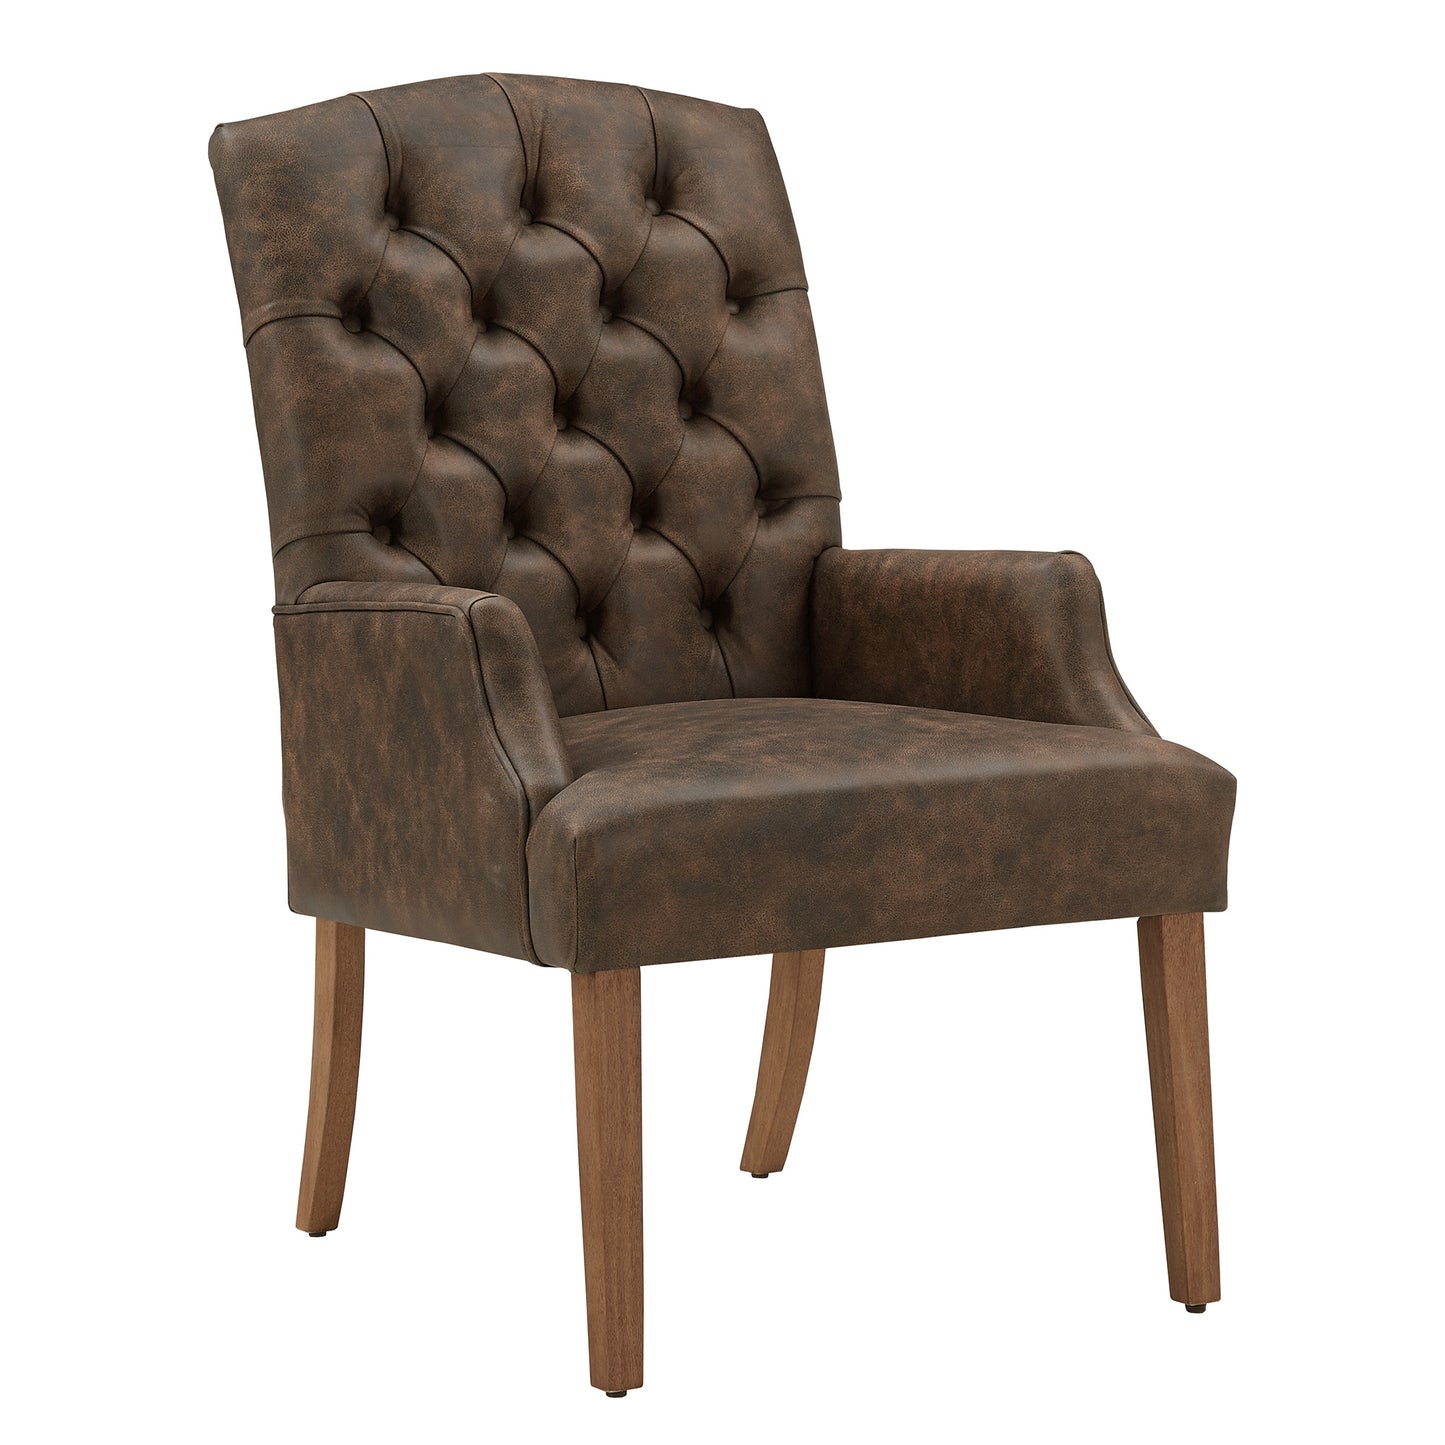 Light Distressed Natural Finish Polished Microfiber Tufted Dining Chair - Brown Polished Microfiber